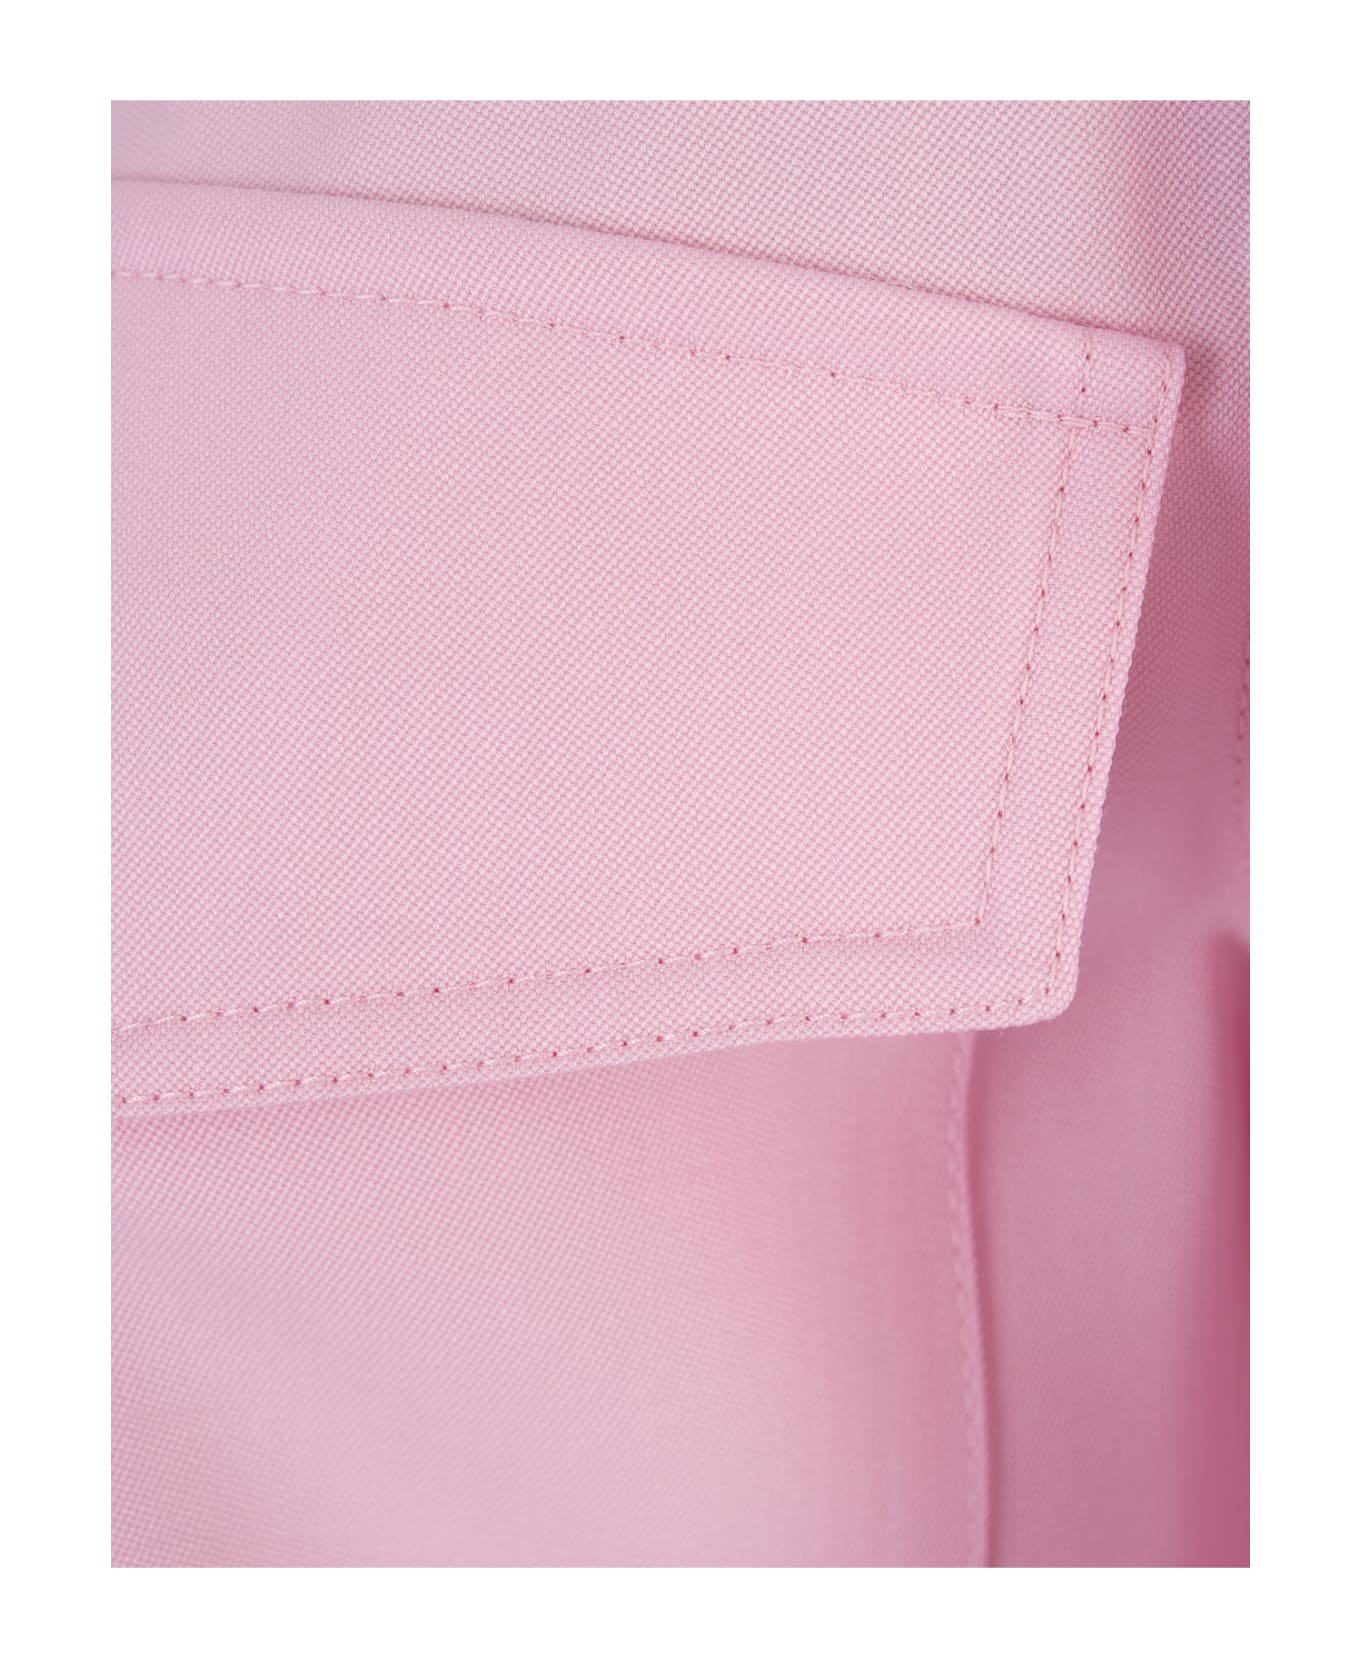 Alexander McQueen Shirt With Military Pockets In Light Pink - Pink